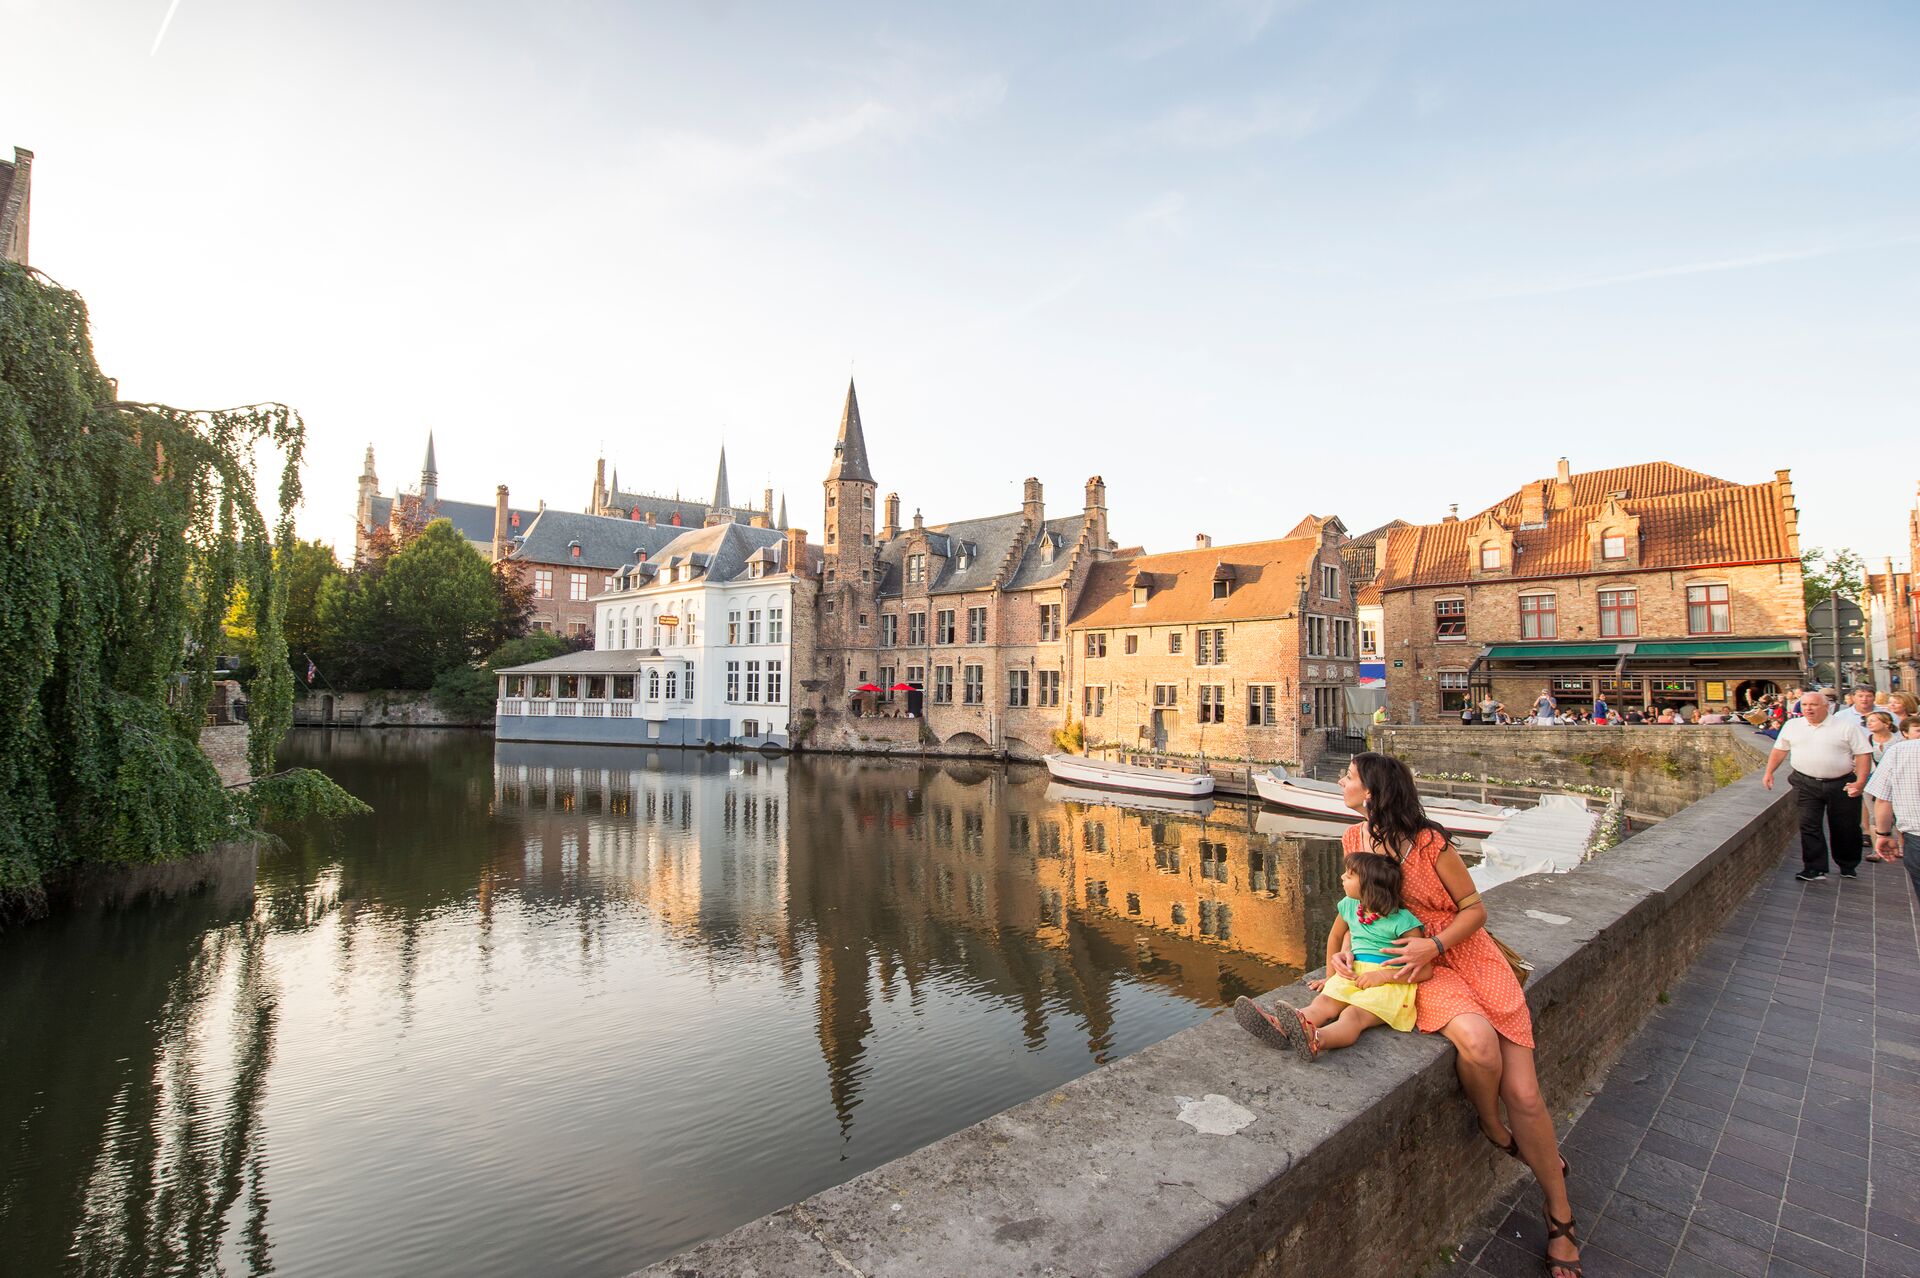 A day in Bruges - the canals